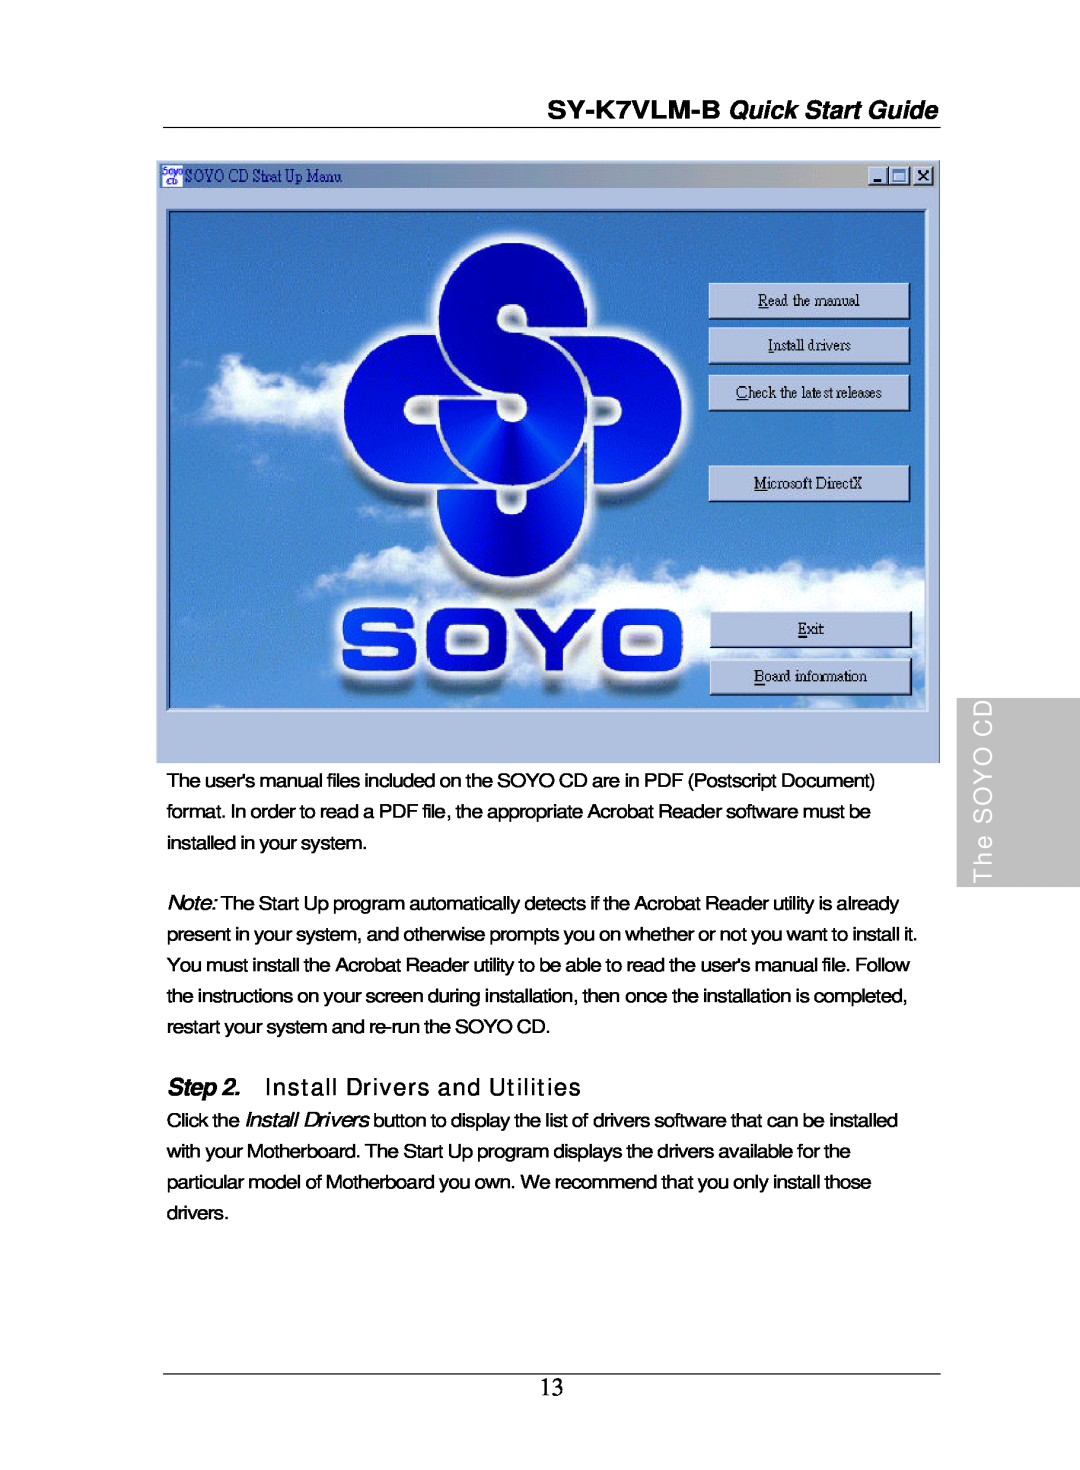 SOYO quick start Install Drivers and Utilities, SY-K7VLM-B Quick Start Guide, The SOYO CD 